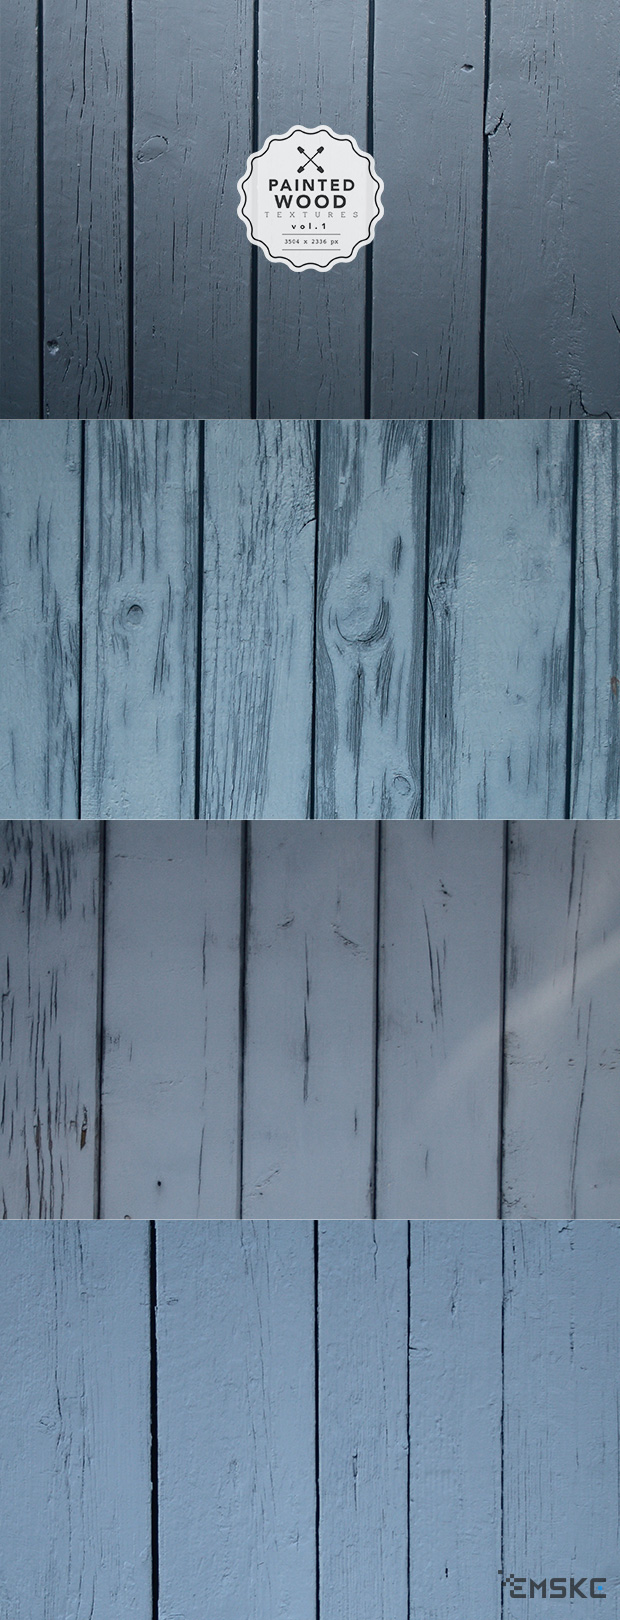 painted-wood-textures